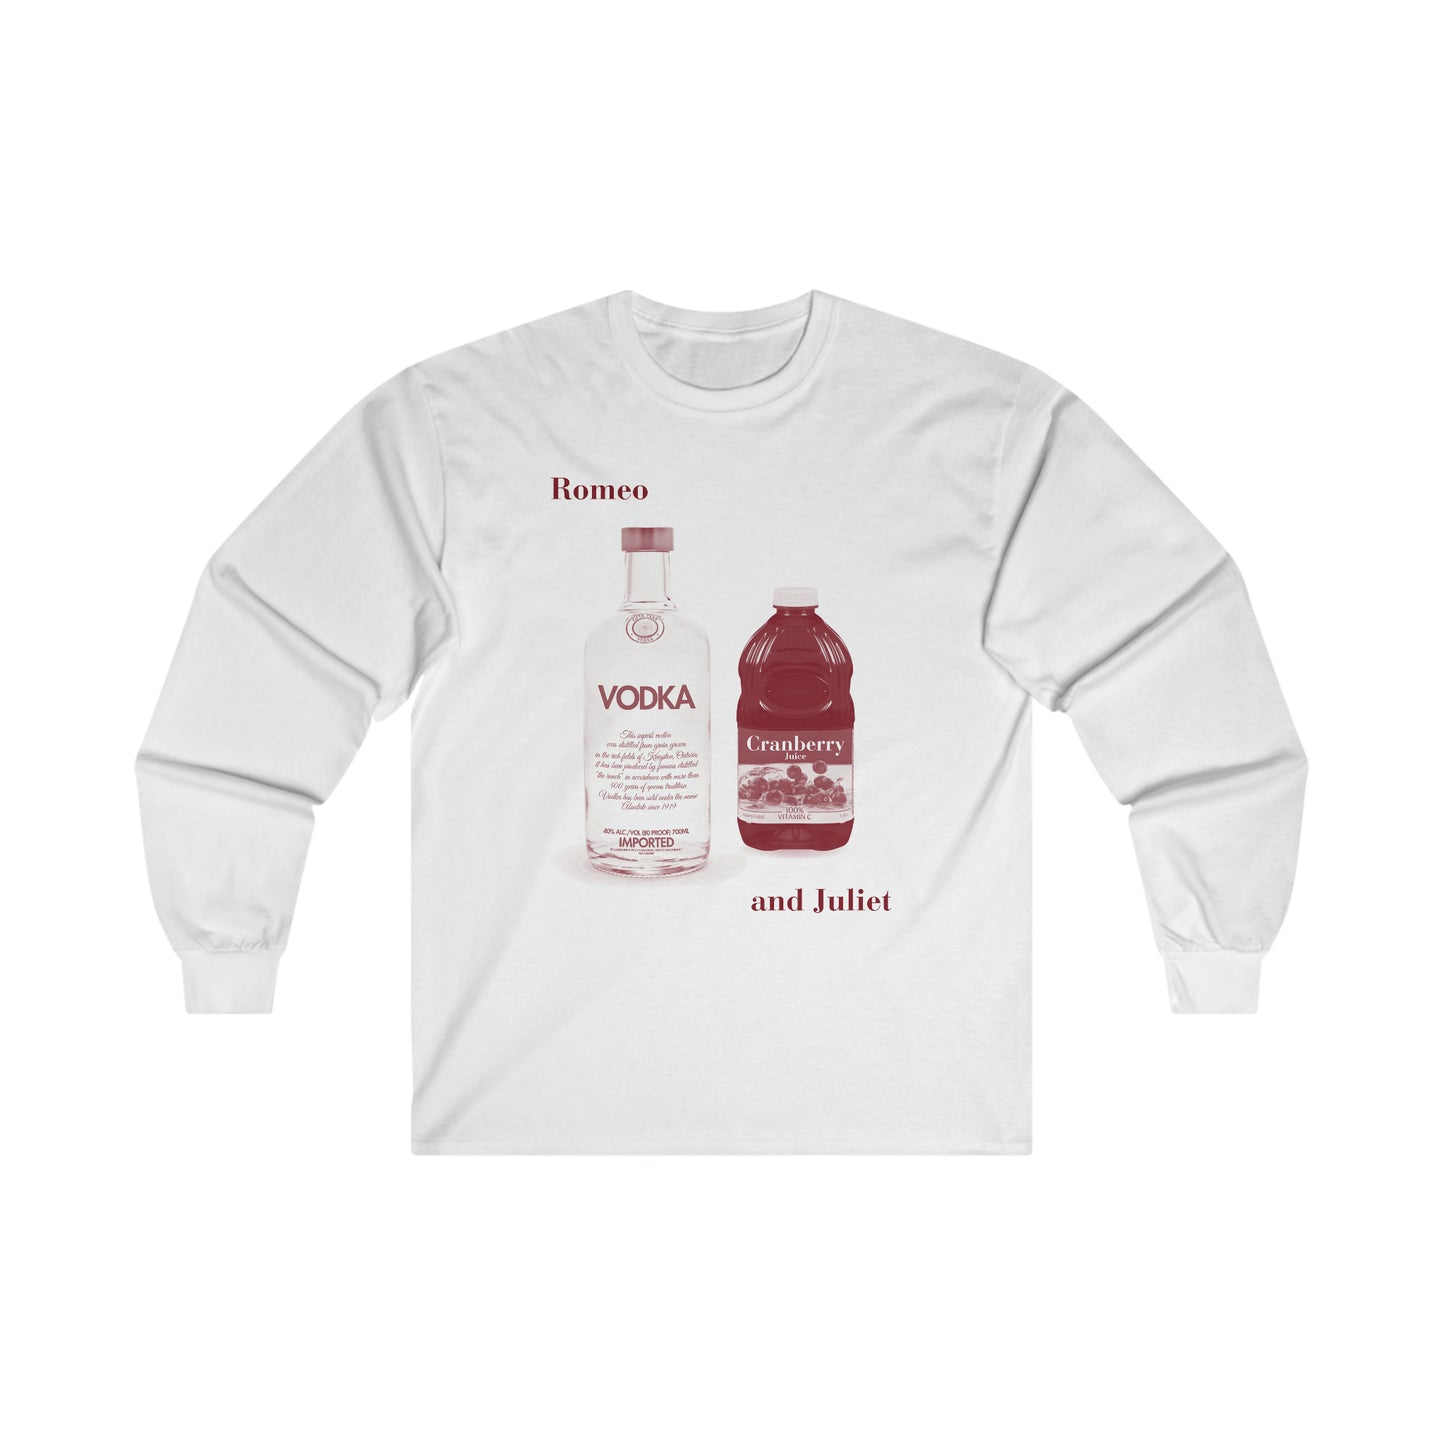 Romeo and Juliet Vodka Cranberry - Ultra Cotton Long Sleeve Tee